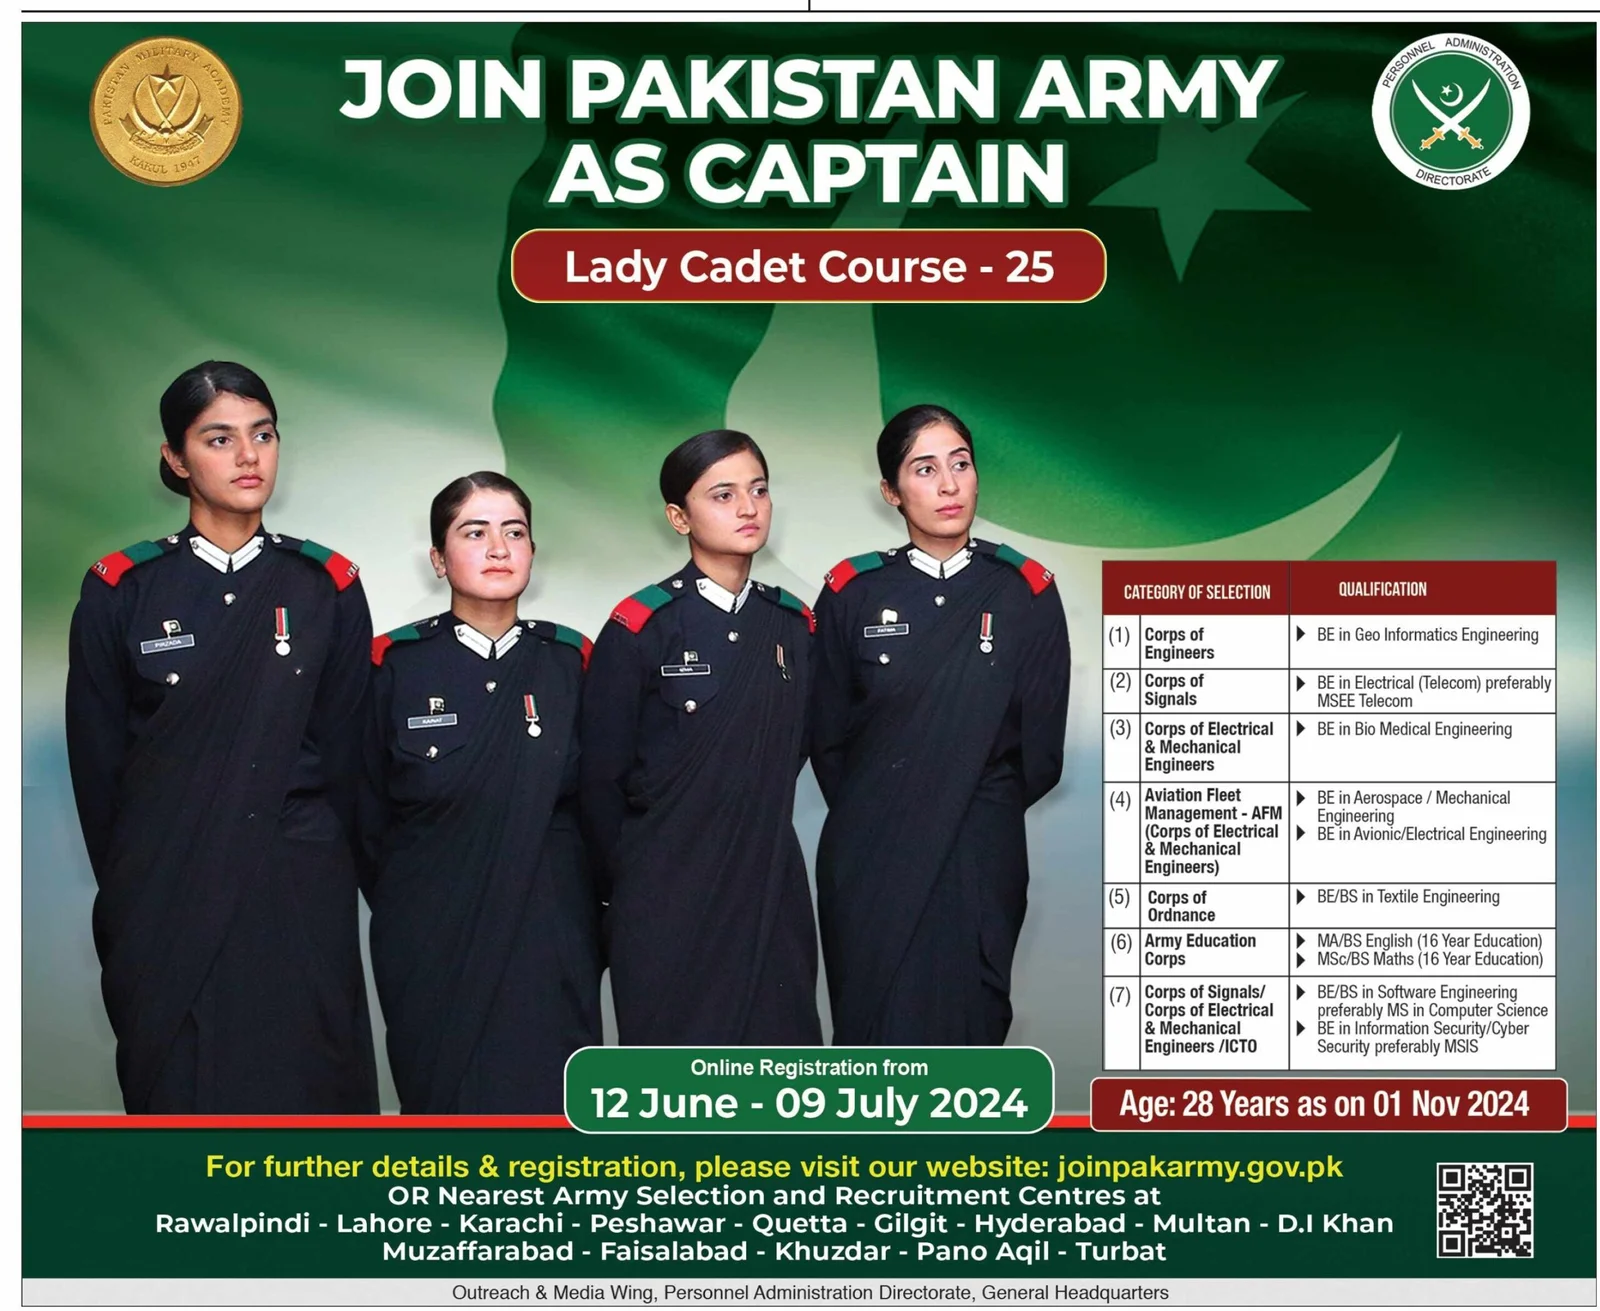 Join Pakistan Army as Lady Captain